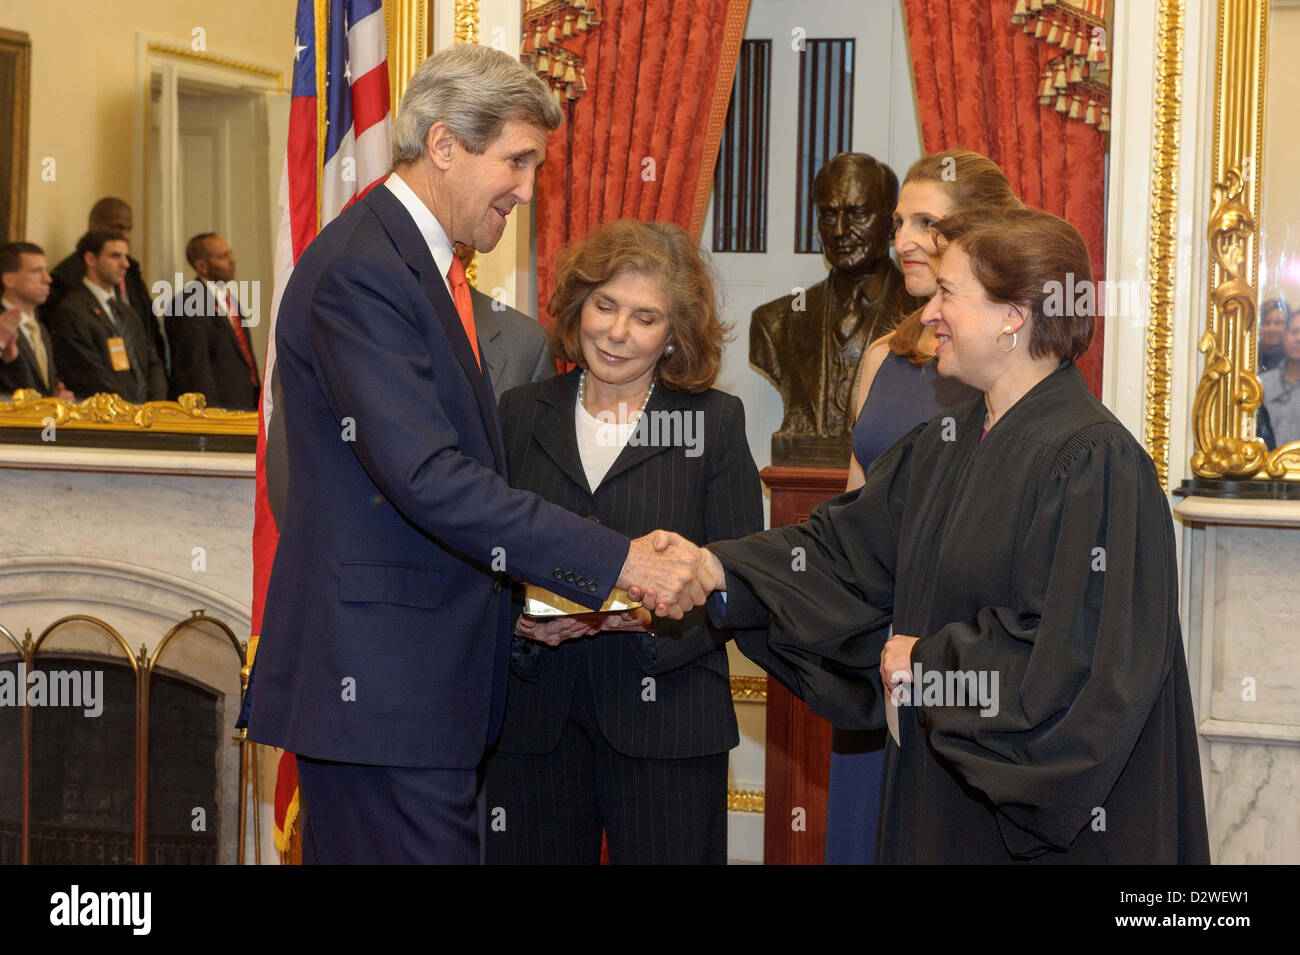 US Supreme Court Justice Elena Kagan congratulates Secretary of State John Kerry following his swears in ceremony in the Foreign Relations Committee Room in the US Capitol February 1, 2013 in Washington, DC. Kerry's wife Teresa, daughter Vanessa, brother Cameron look on during the brief ceremony. Stock Photo